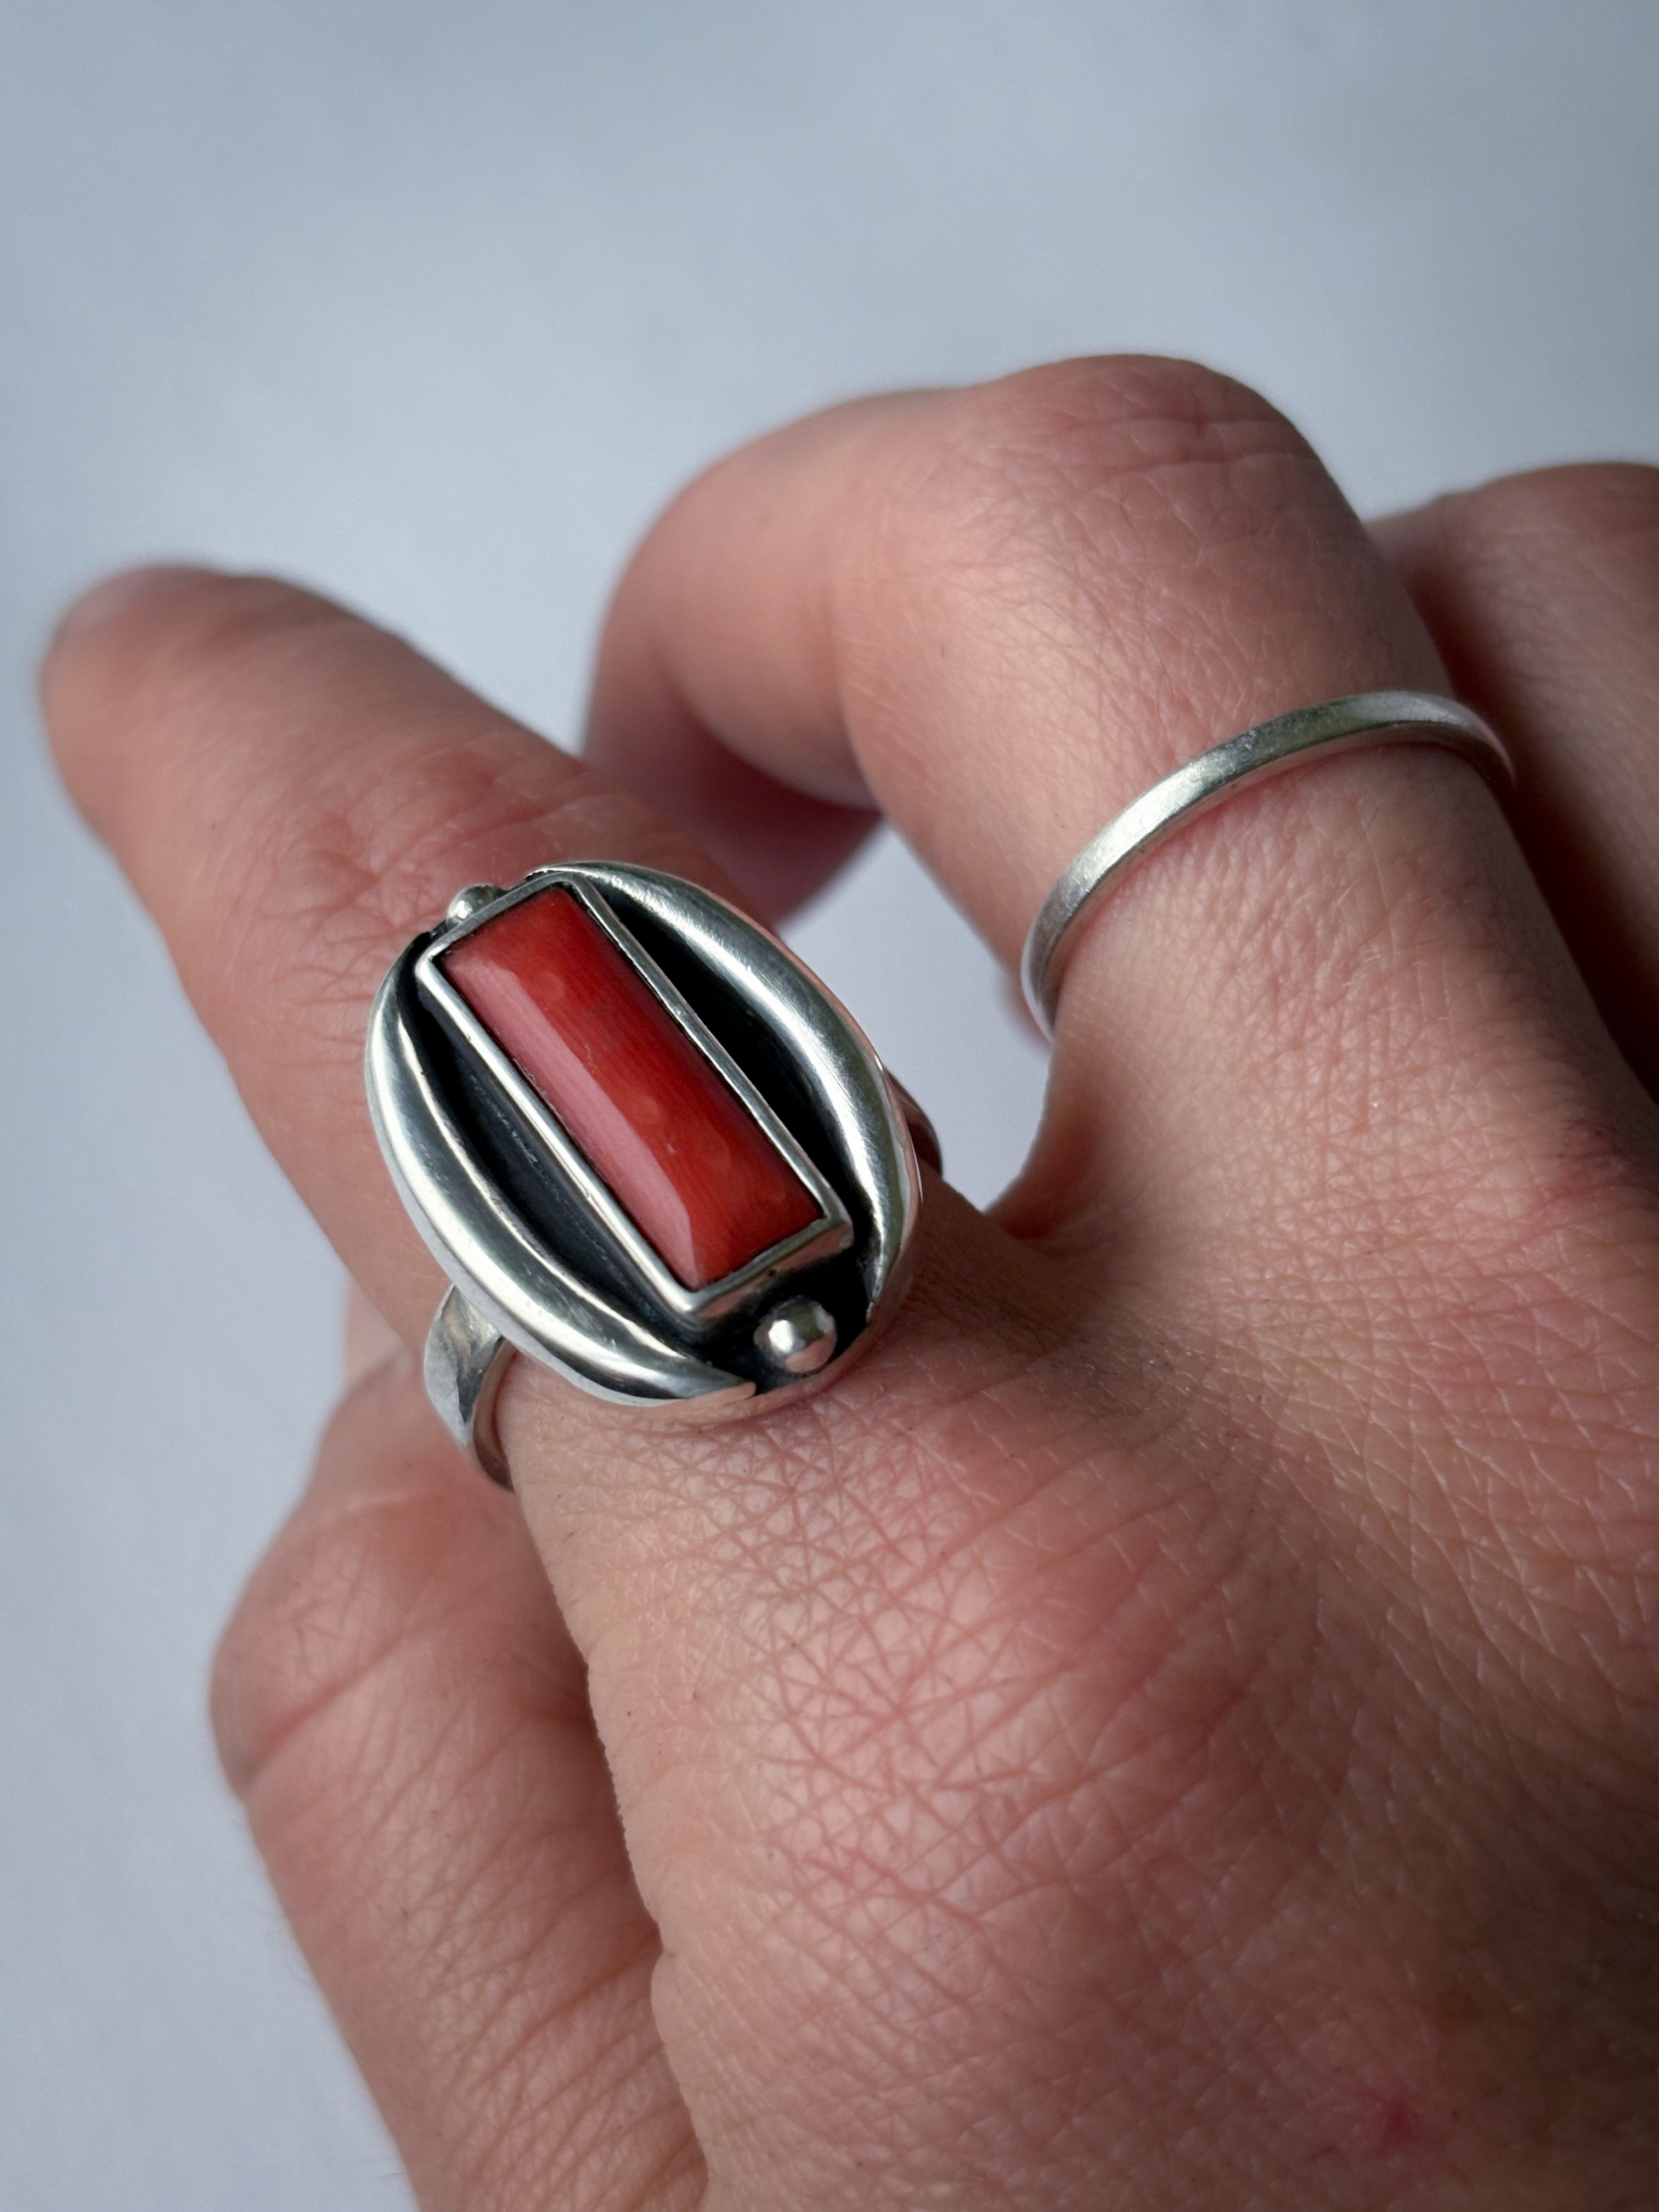 Red Coral Ring